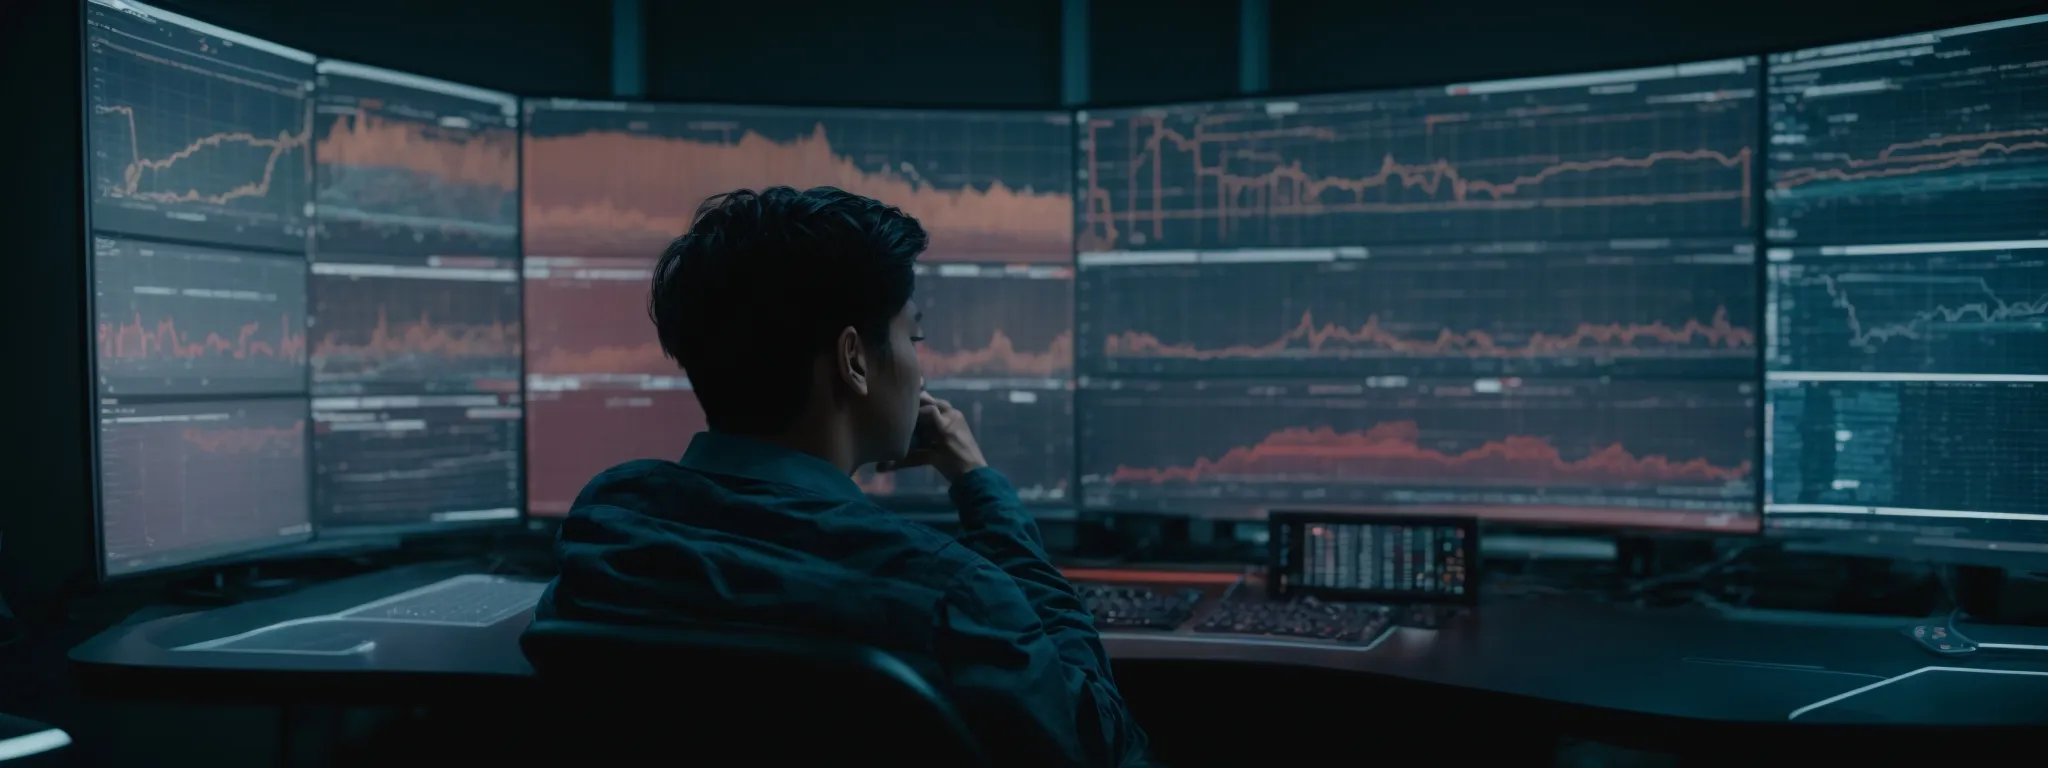 a person sits in front of a futuristic computer interface, analyzing complex seo data visualizations.